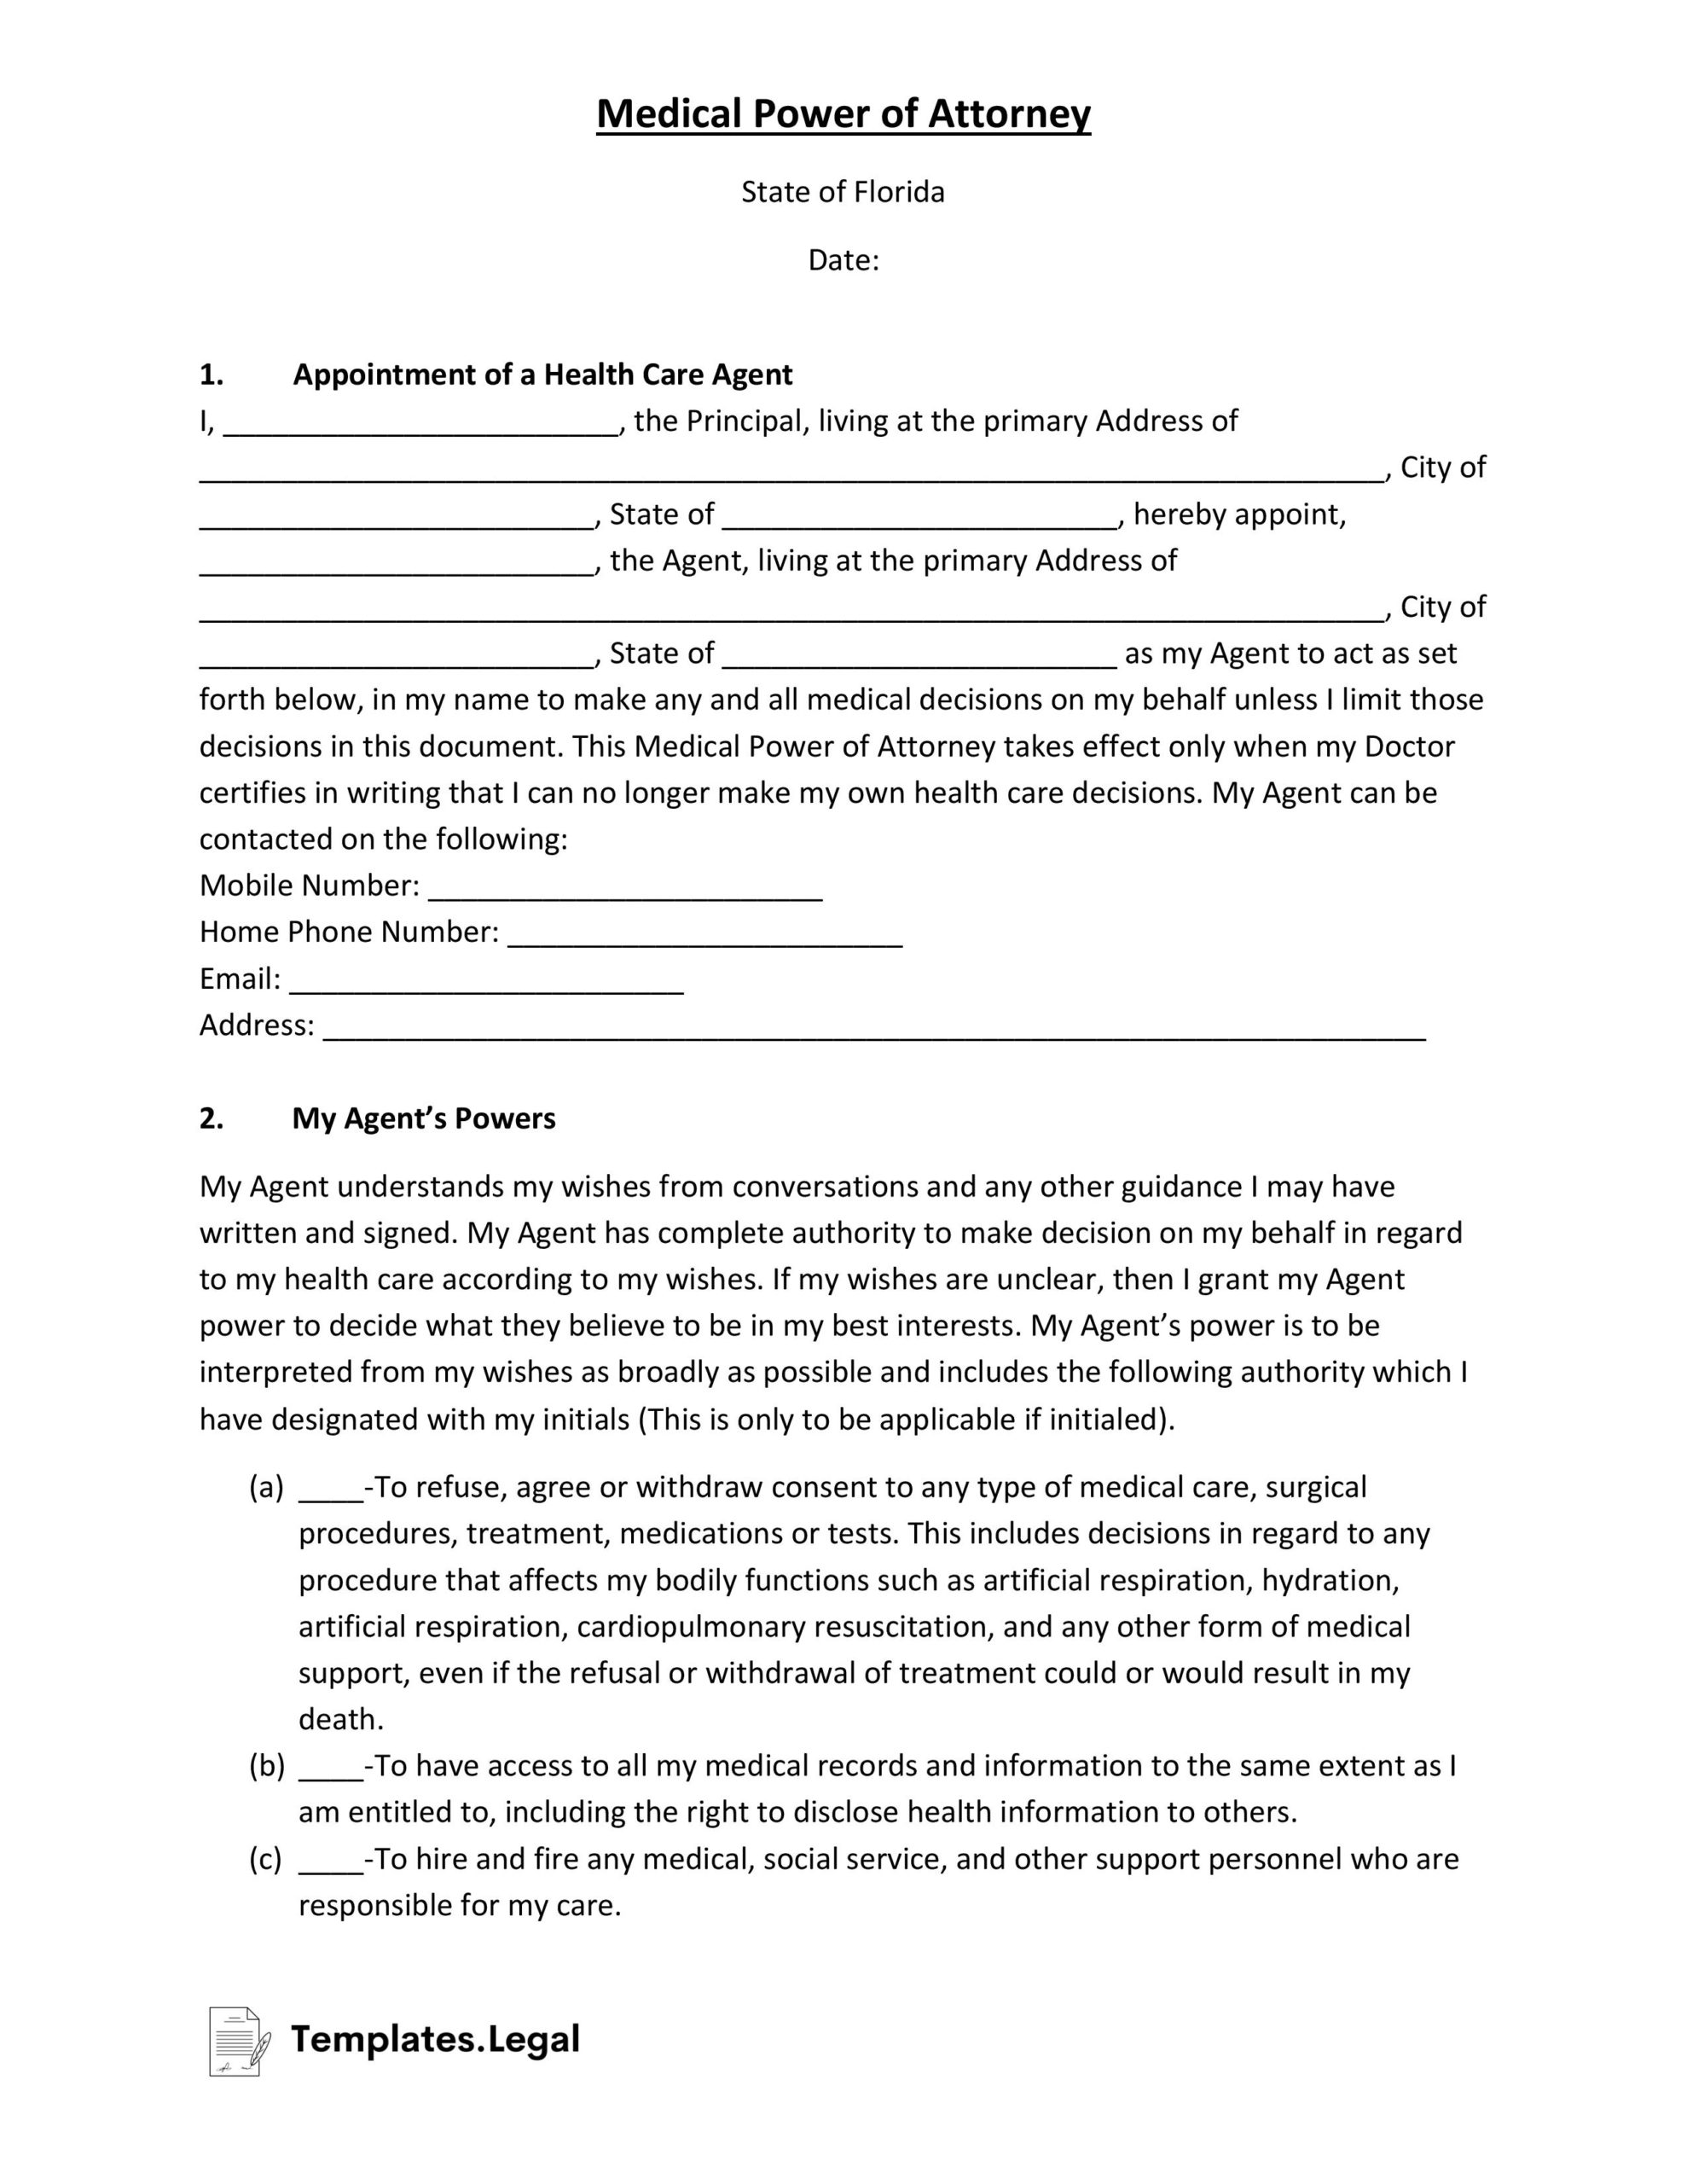 Florida Power of Attorney Templates (Free) [Word, PDF & ODT]